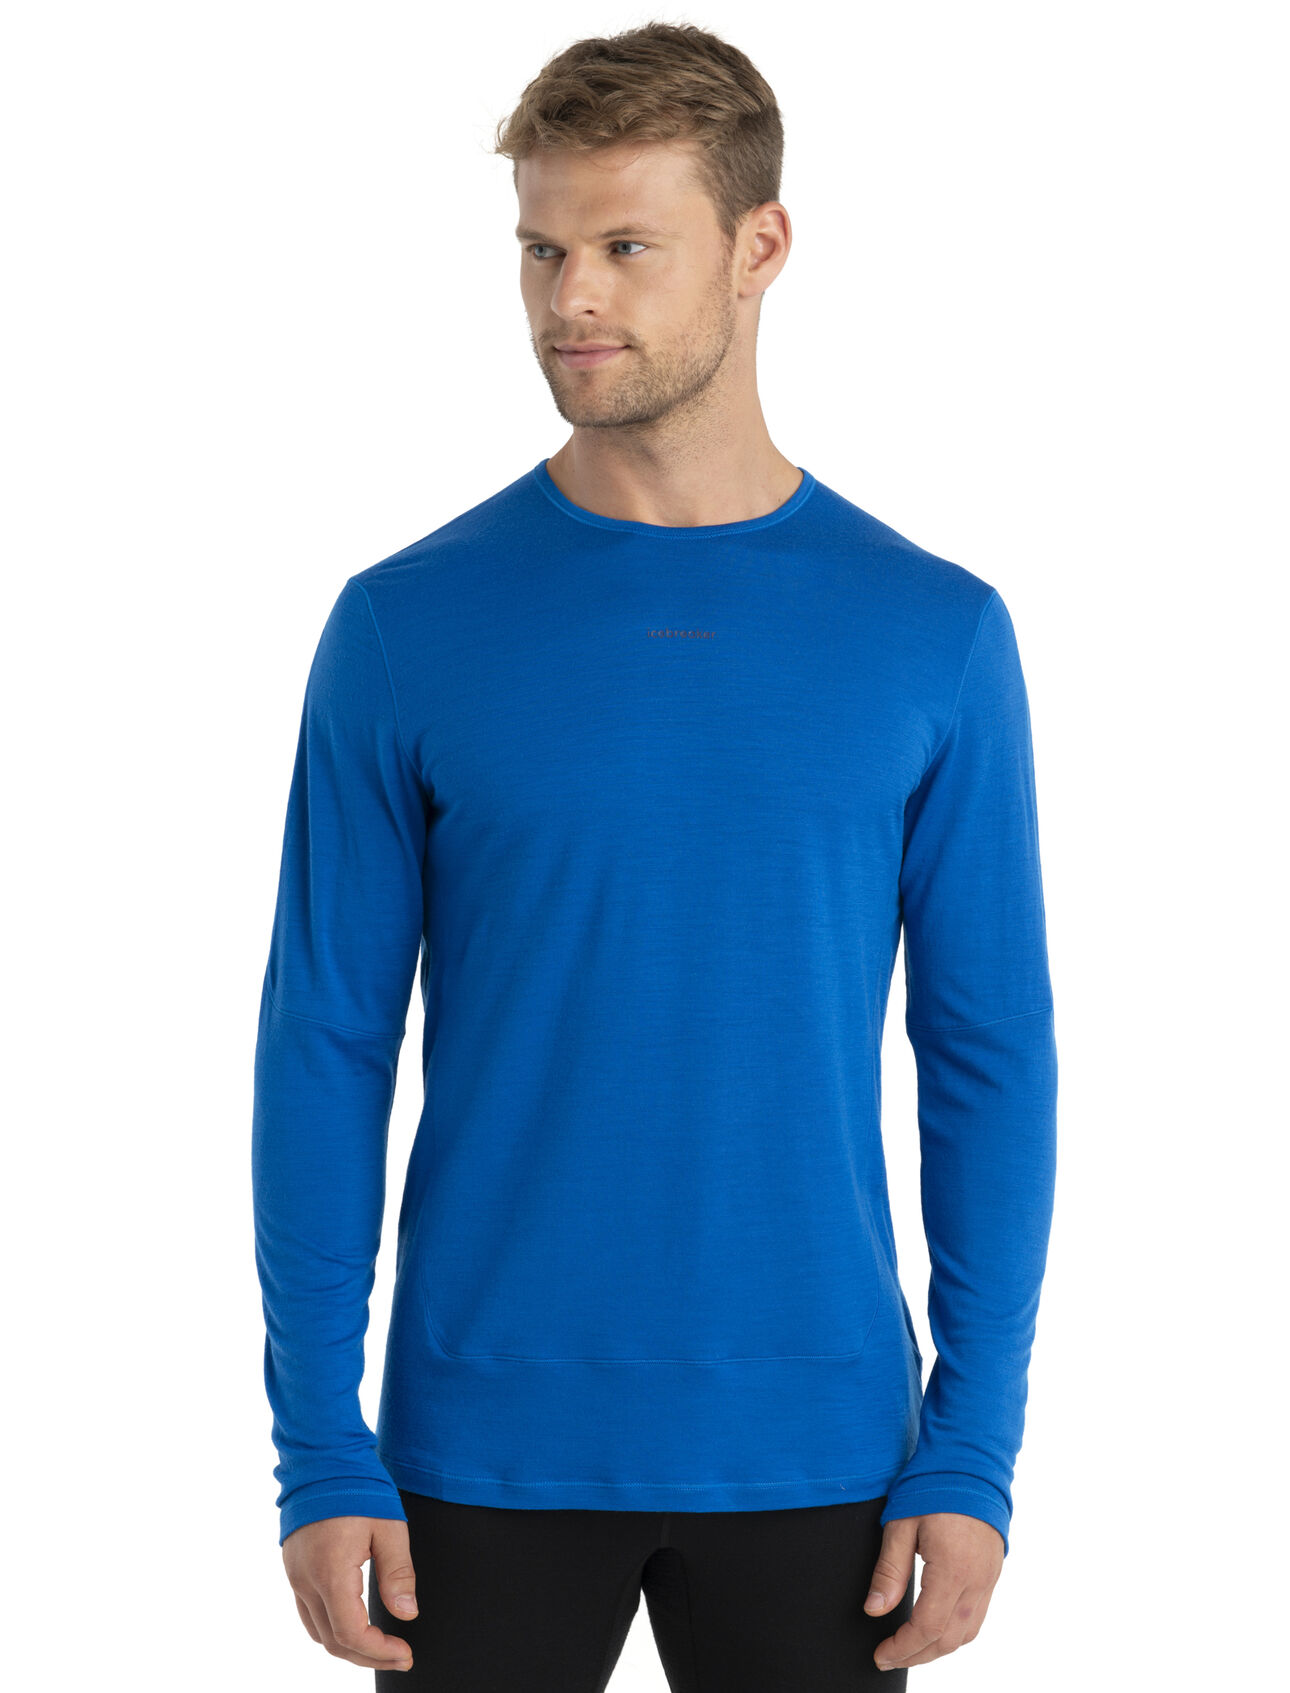 Mens 200 ZoneKnit™ Merino Energy Wind Long Sleeve T-Shirt A highly breathable midweight top for high-output activities, the 200 ZoneKnit™ Energy Wind Long Sleeve T-Shirt features a body-mapped combination of Cool-Lite merino jersey and ultra-breathable eyelet mesh to help keep you cool.